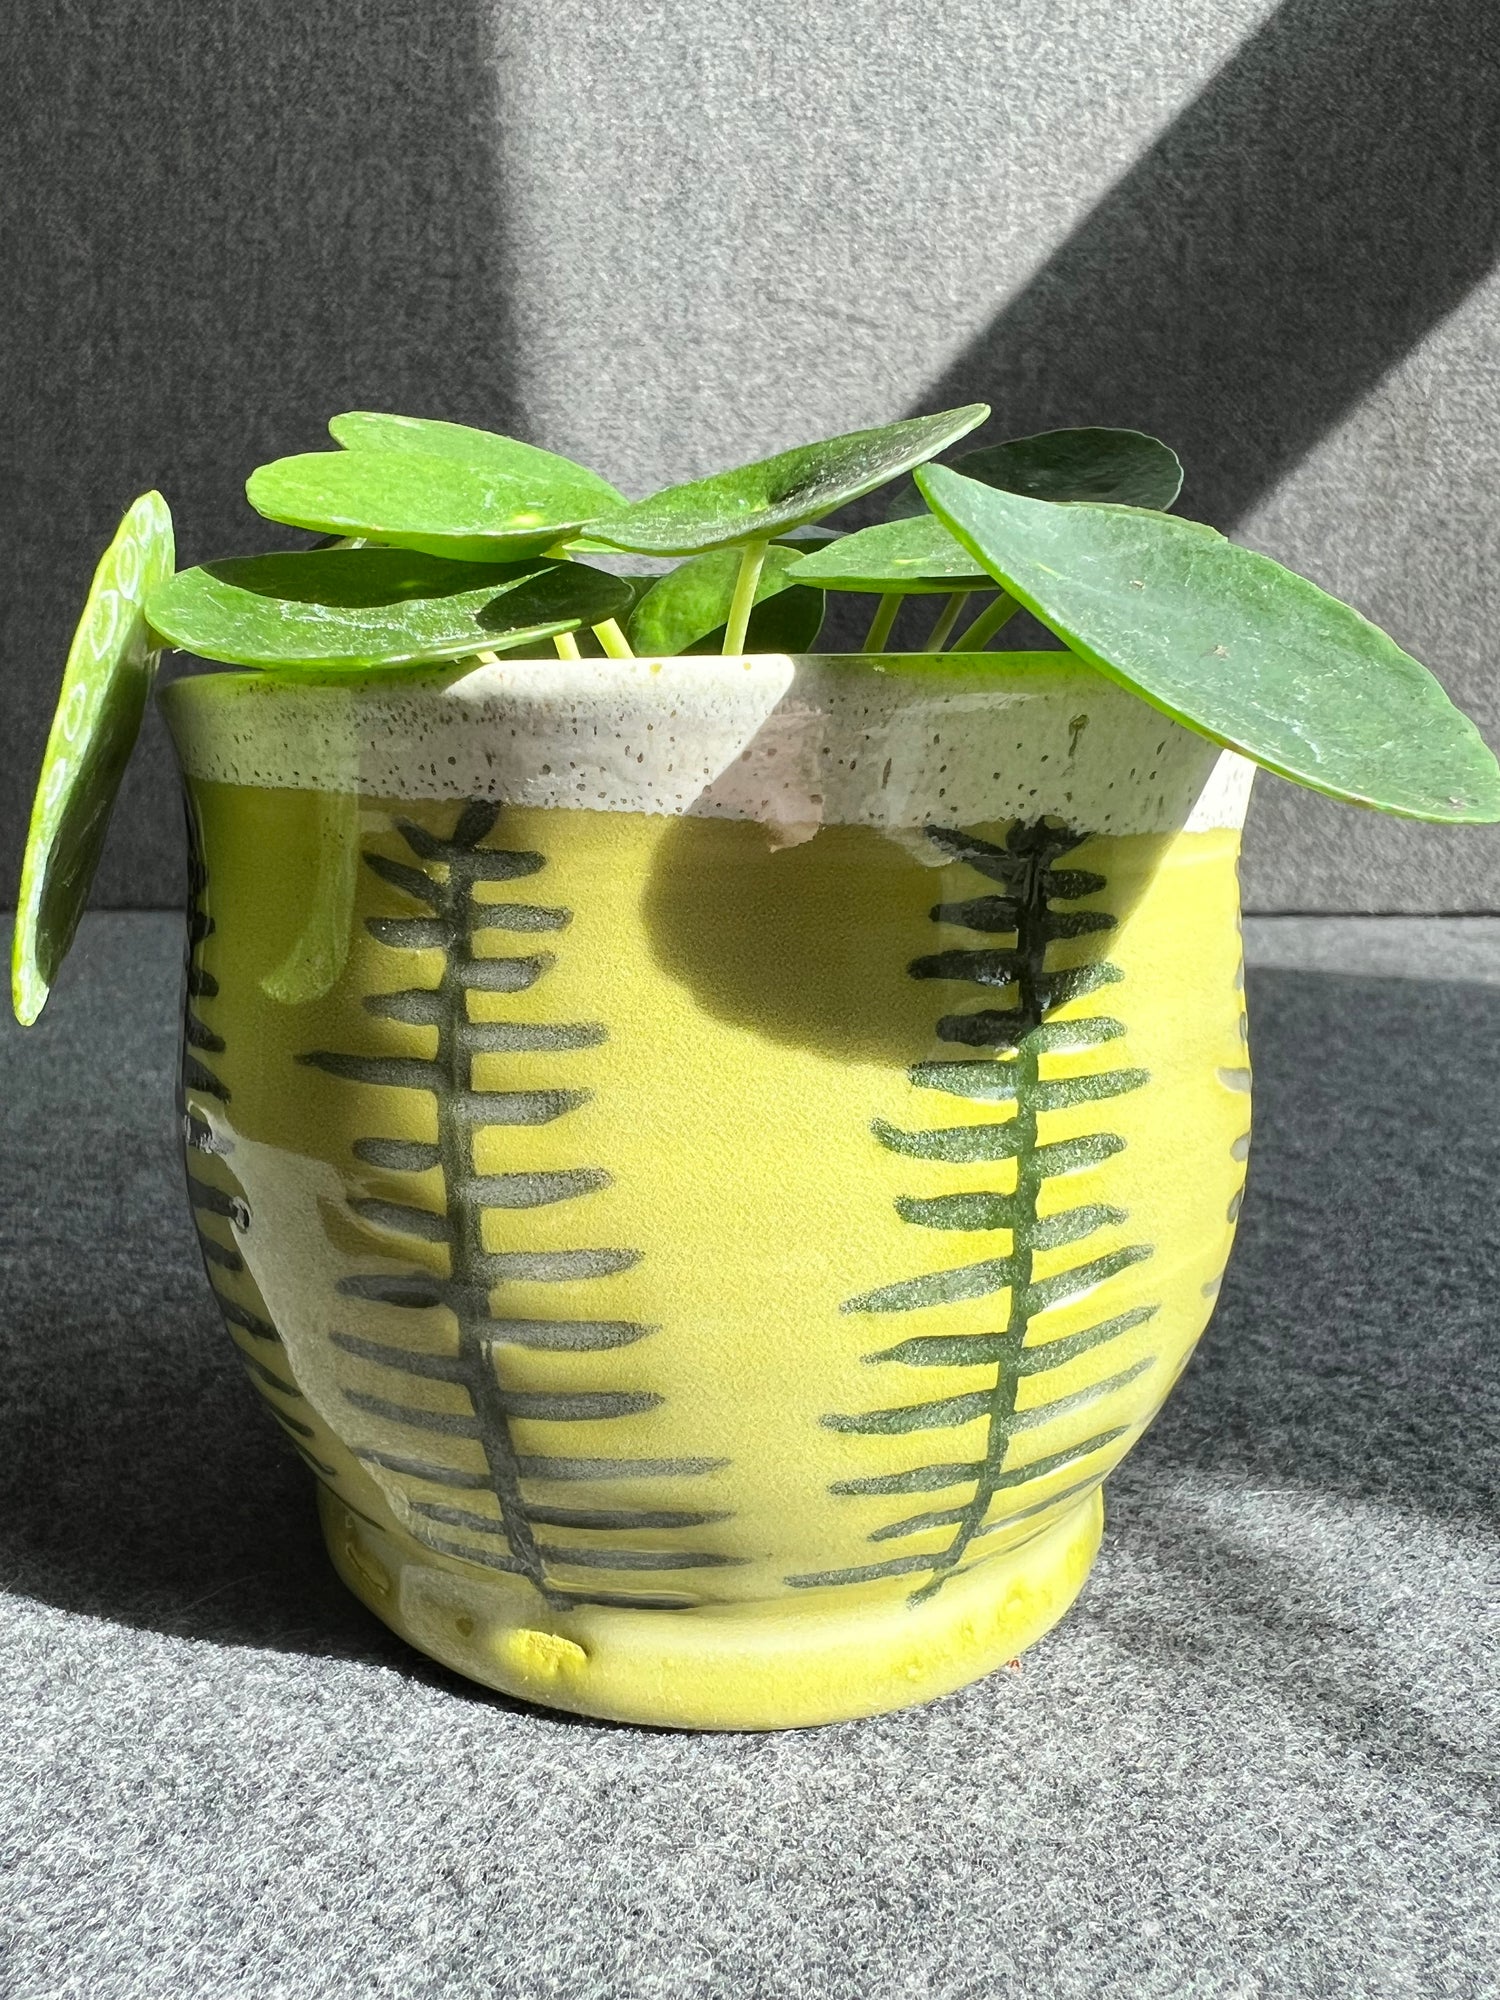 A green plant in a handmade decorative chartreuse pot with carved dark green fern leaves rests on a gray surface, exuding natural beauty and adding a touch of vibrancy to the surroundings.